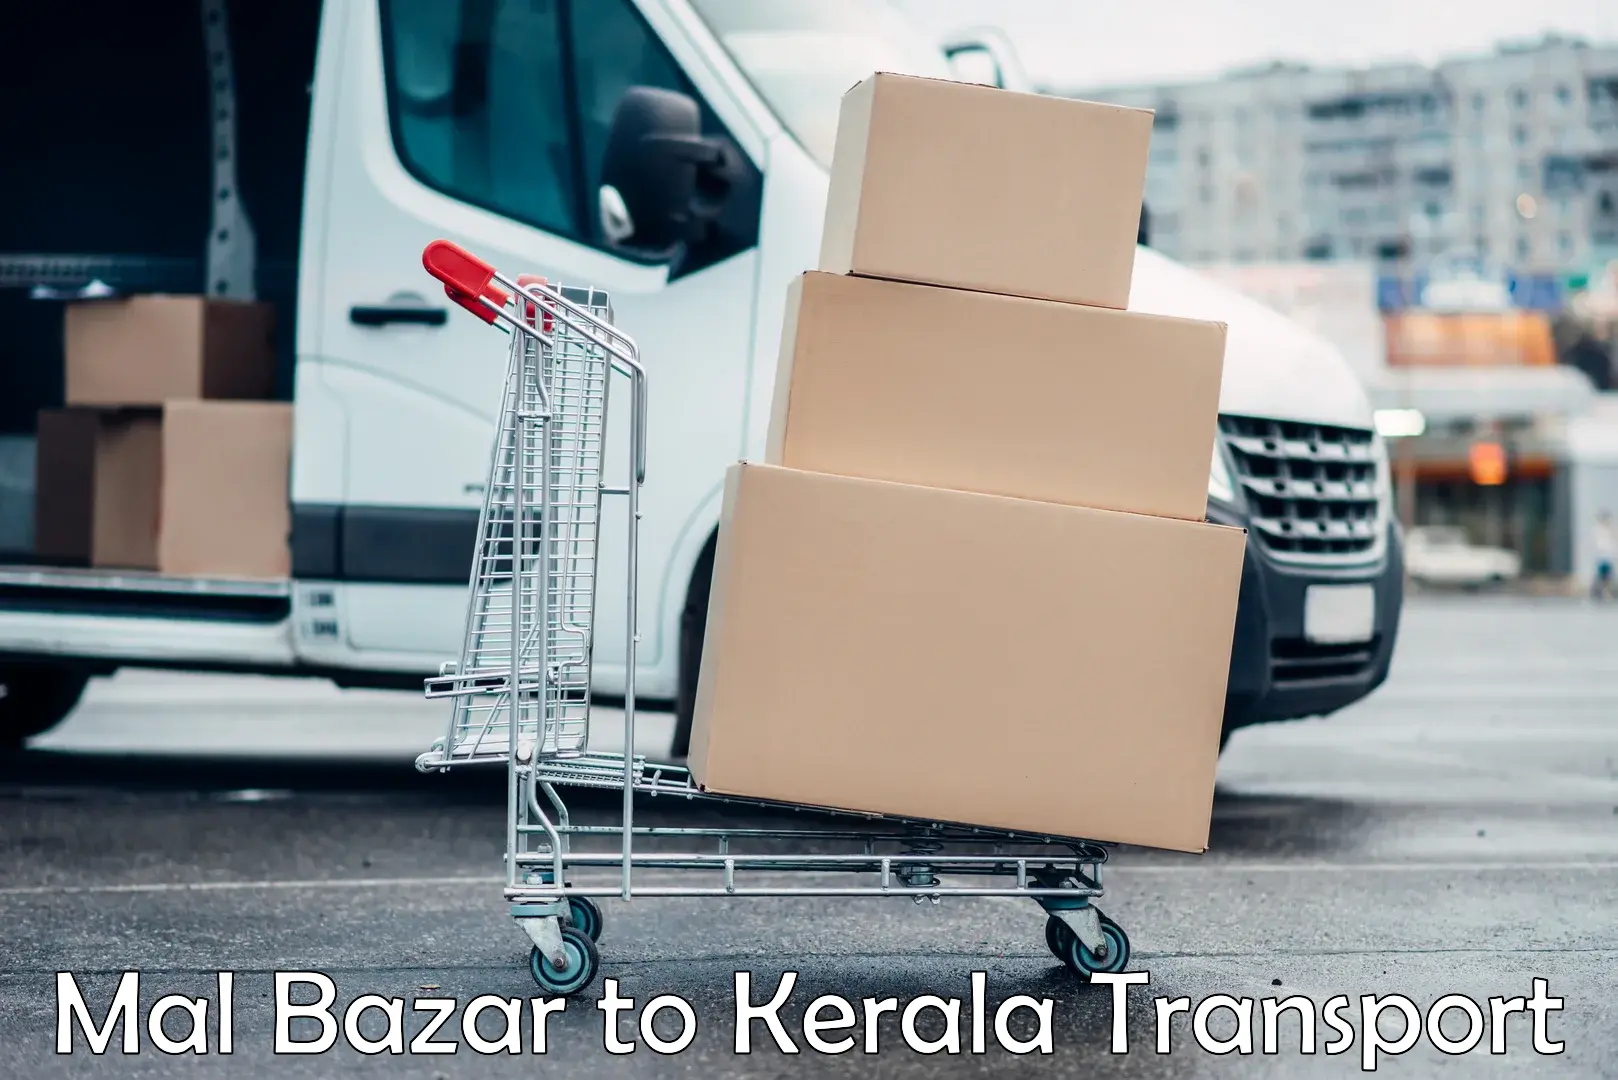 Delivery service Mal Bazar to Kanhangad